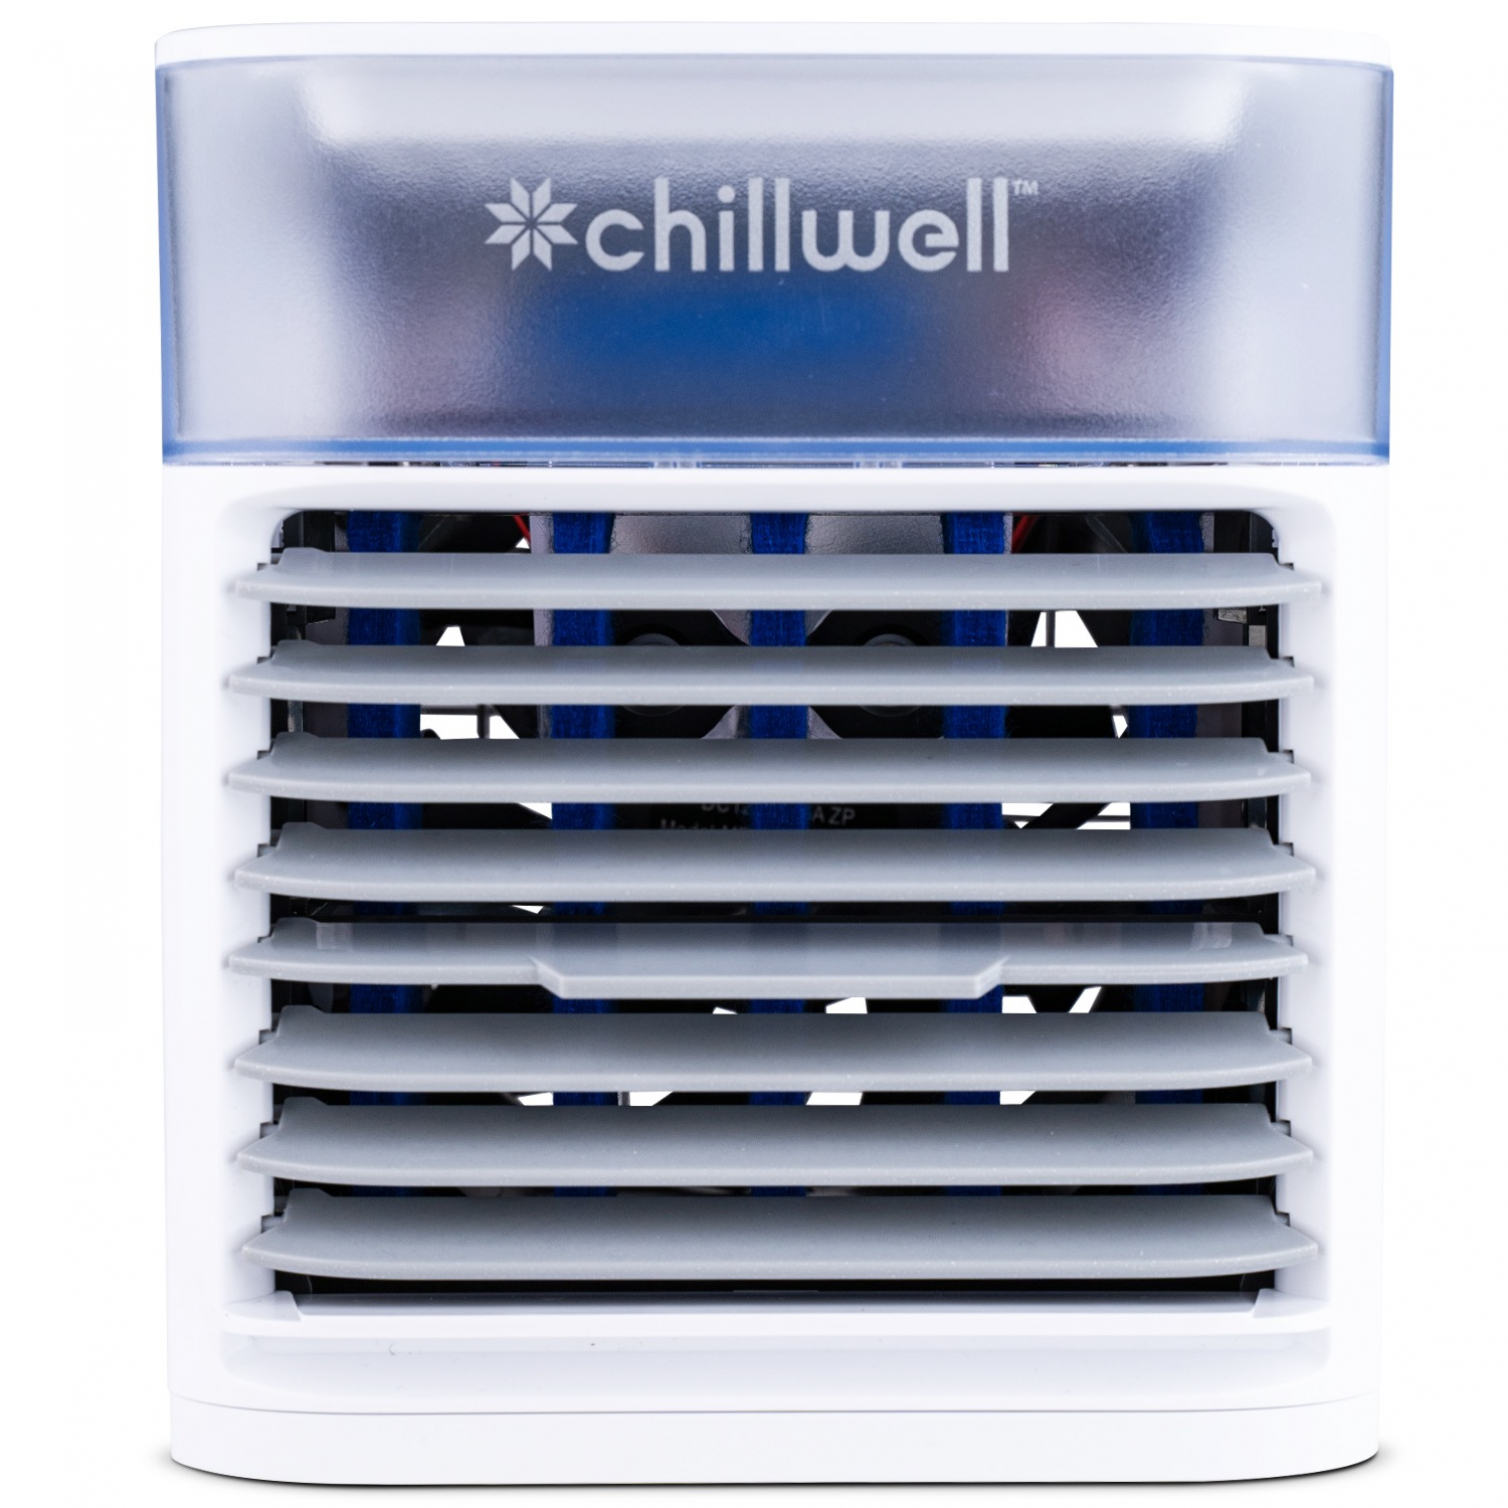 Portable Air Cooler Chillwell Ac